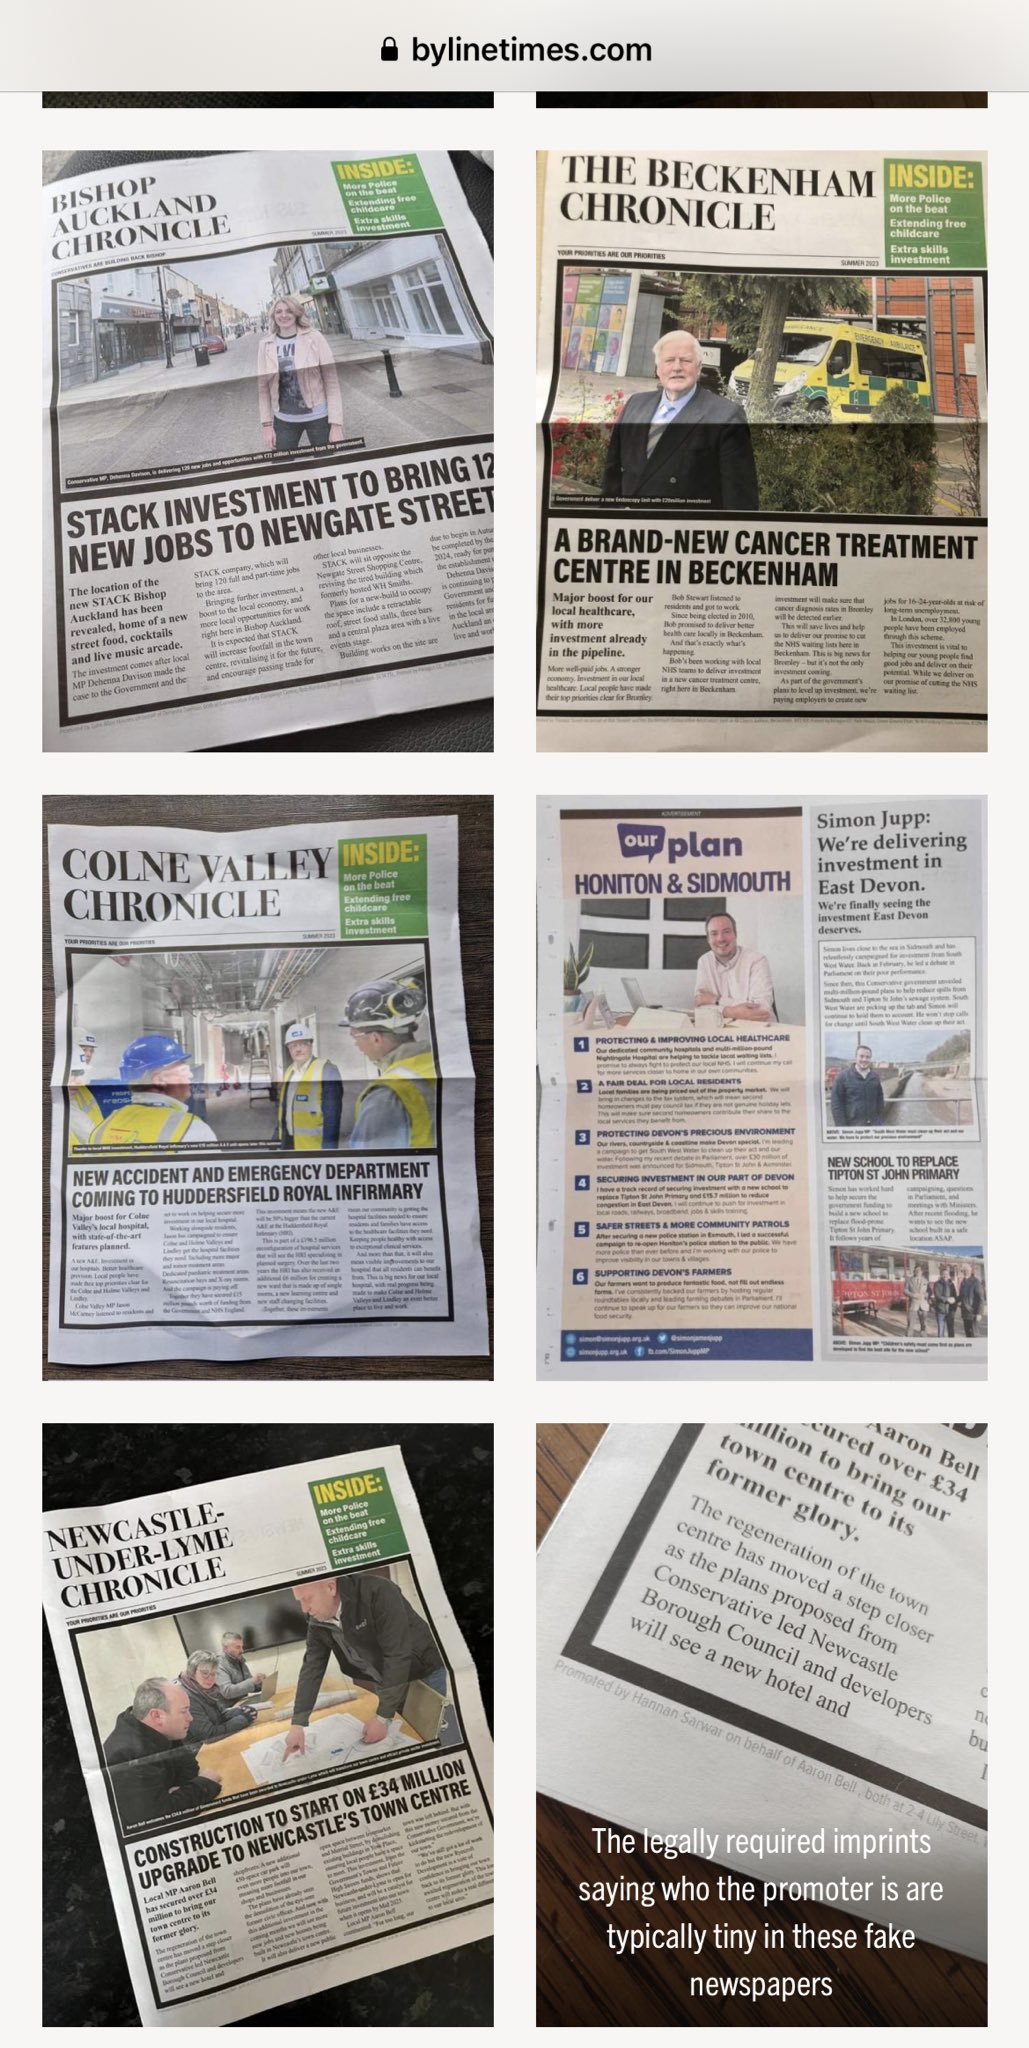 Revealed: The Scandal of the Fake Newspapers Pushed by